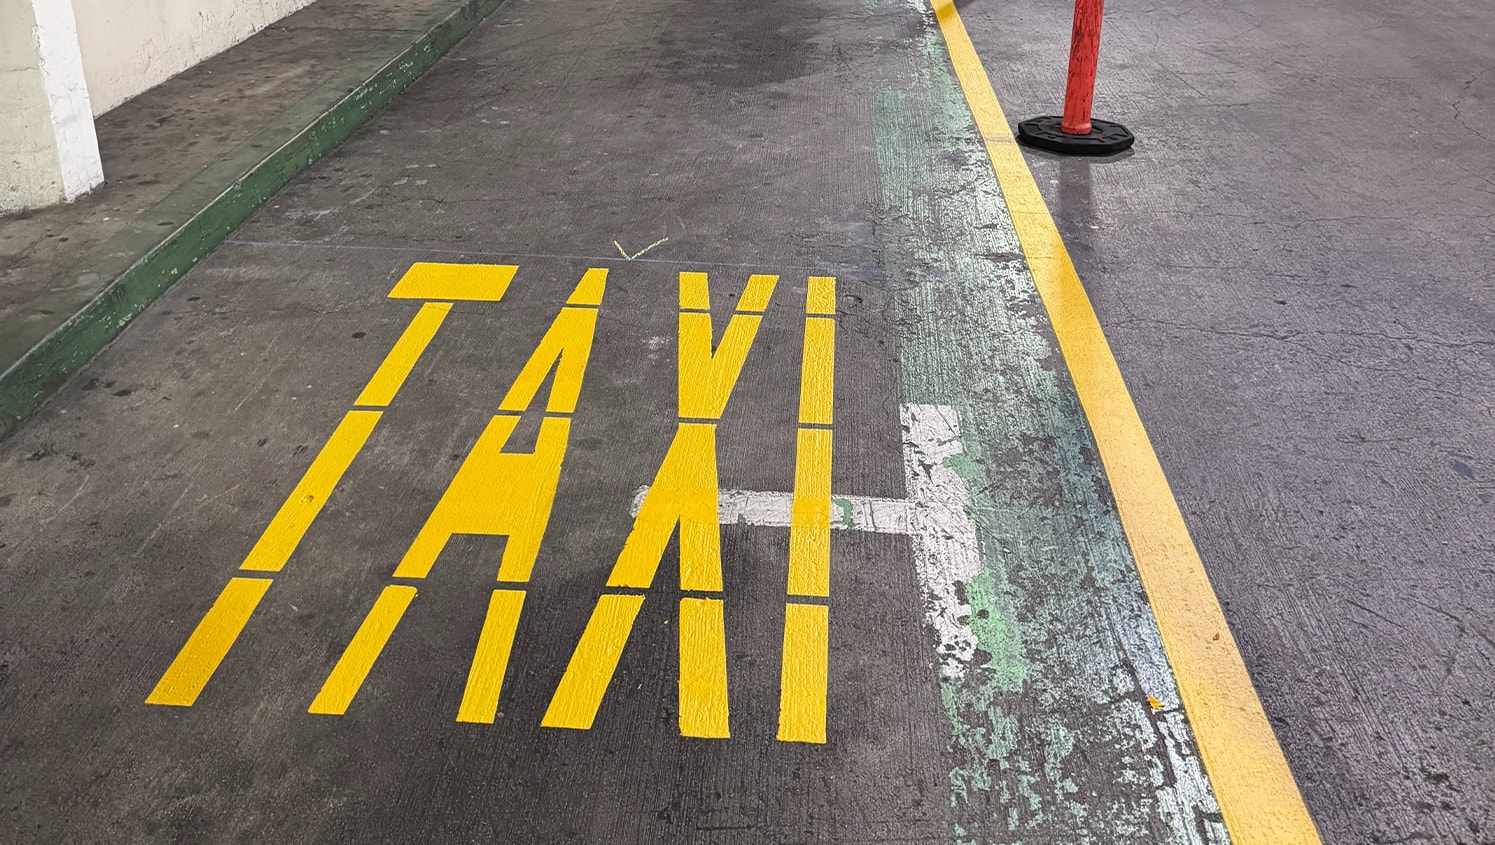 freshly painted taxi markings on Ala Moana Shopping Center parking lot